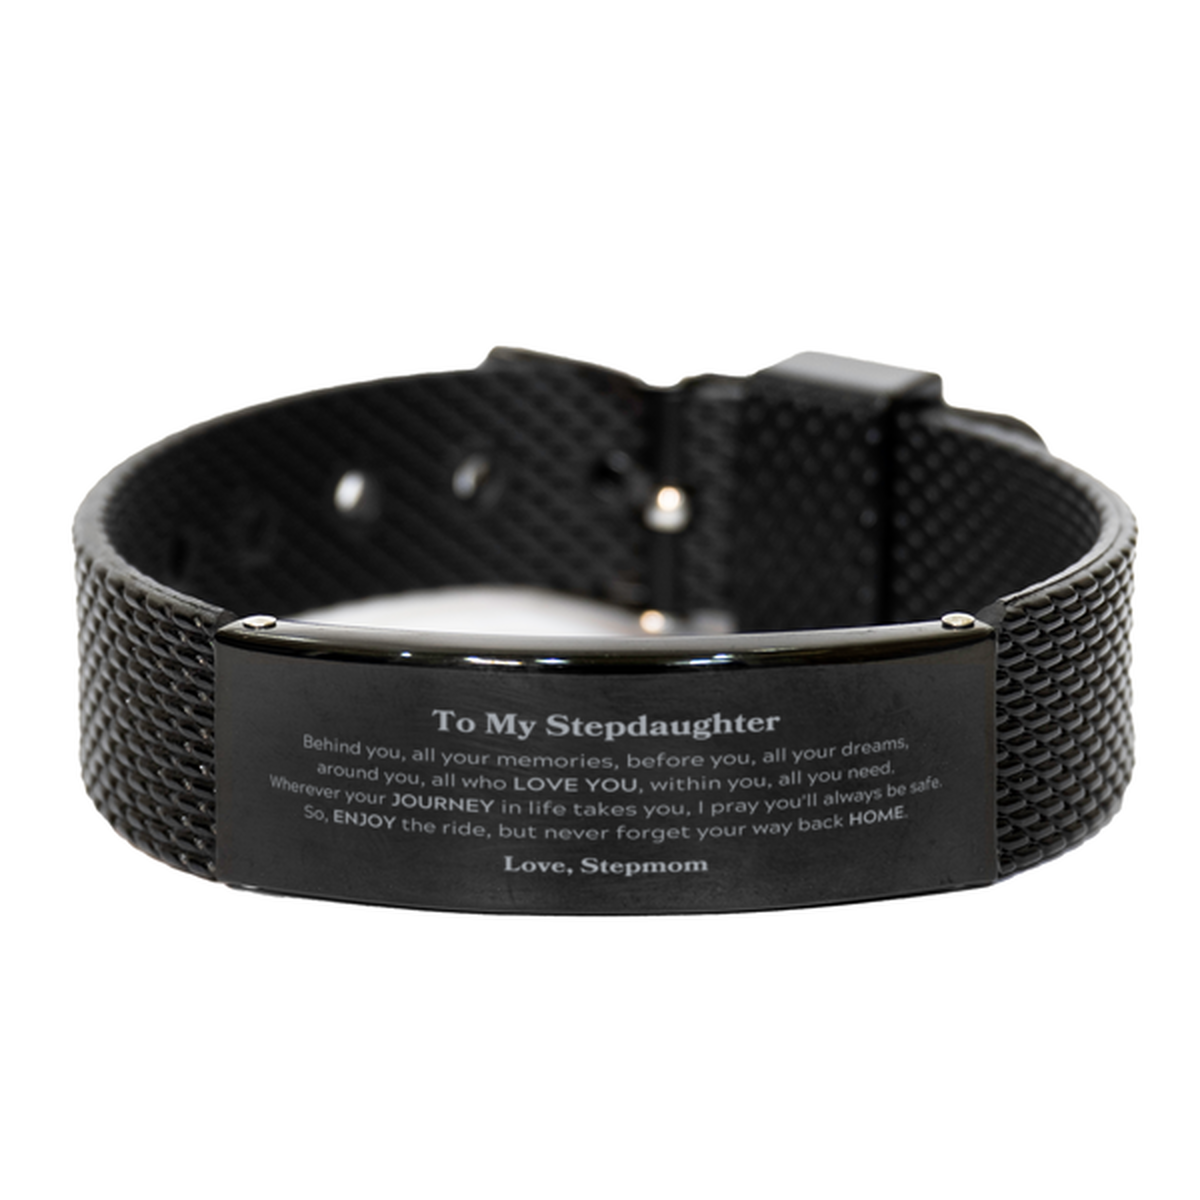 To My Stepdaughter Graduation Gifts from Stepmom, Stepdaughter Black Shark Mesh Bracelet Christmas Birthday Gifts for Stepdaughter Behind you, all your memories, before you, all your dreams. Love, Stepmom